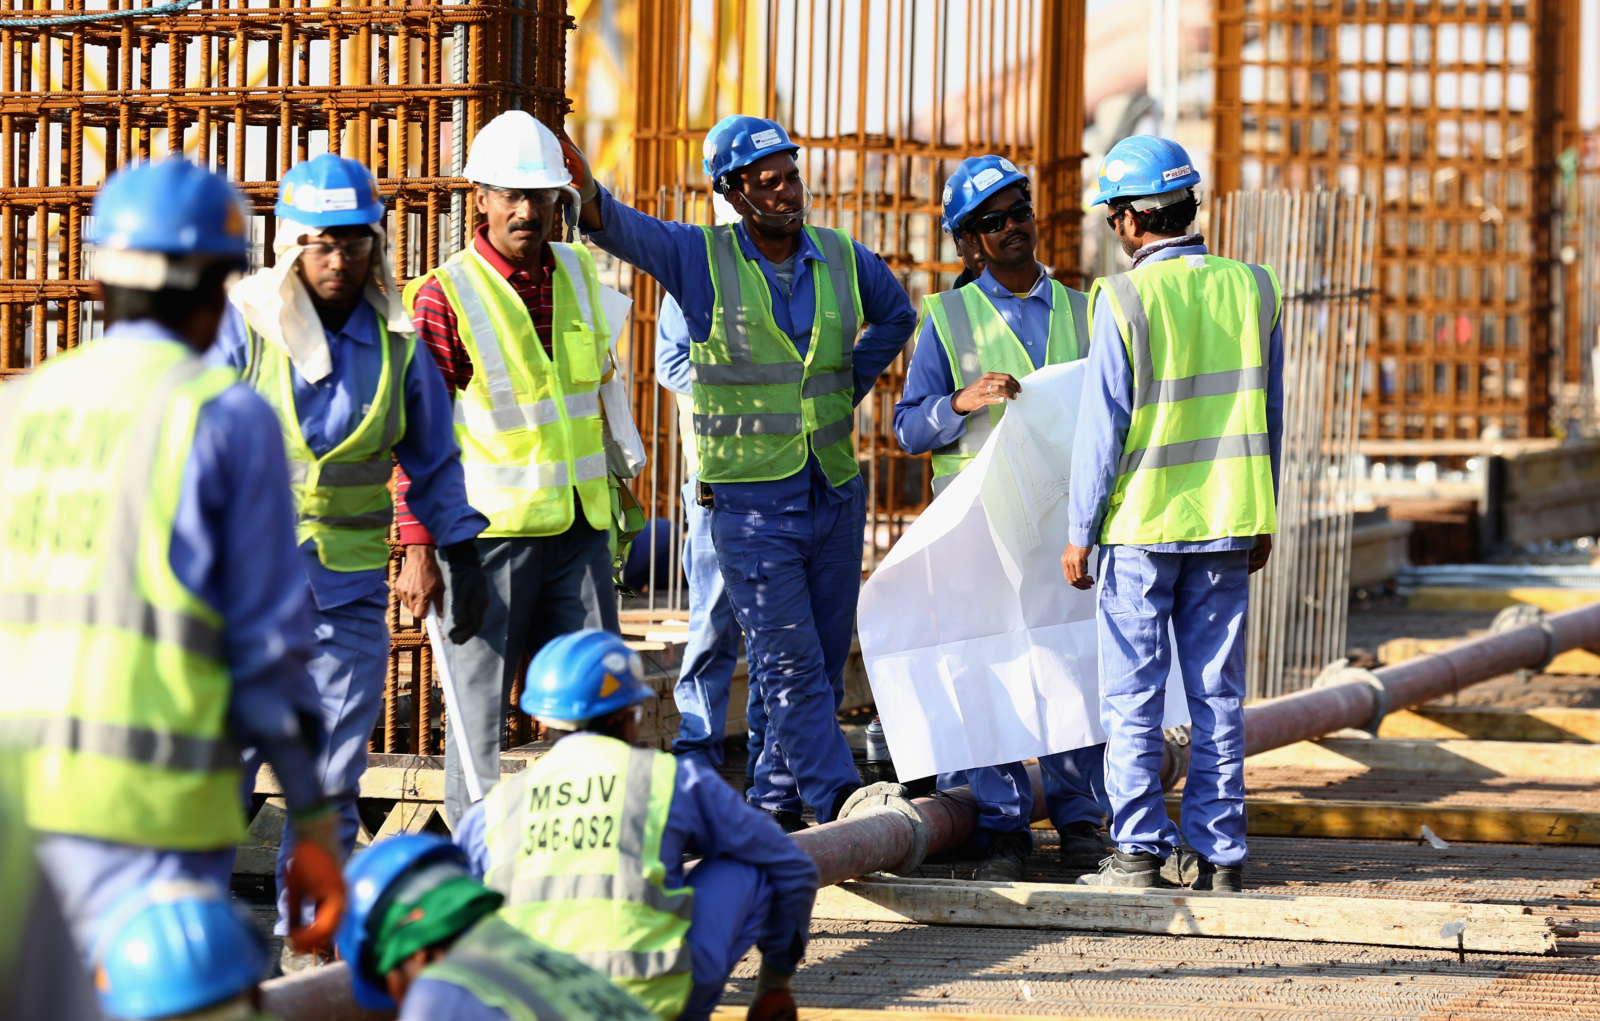 Qatar: Migrant workers still at risk of abuse despite reforms